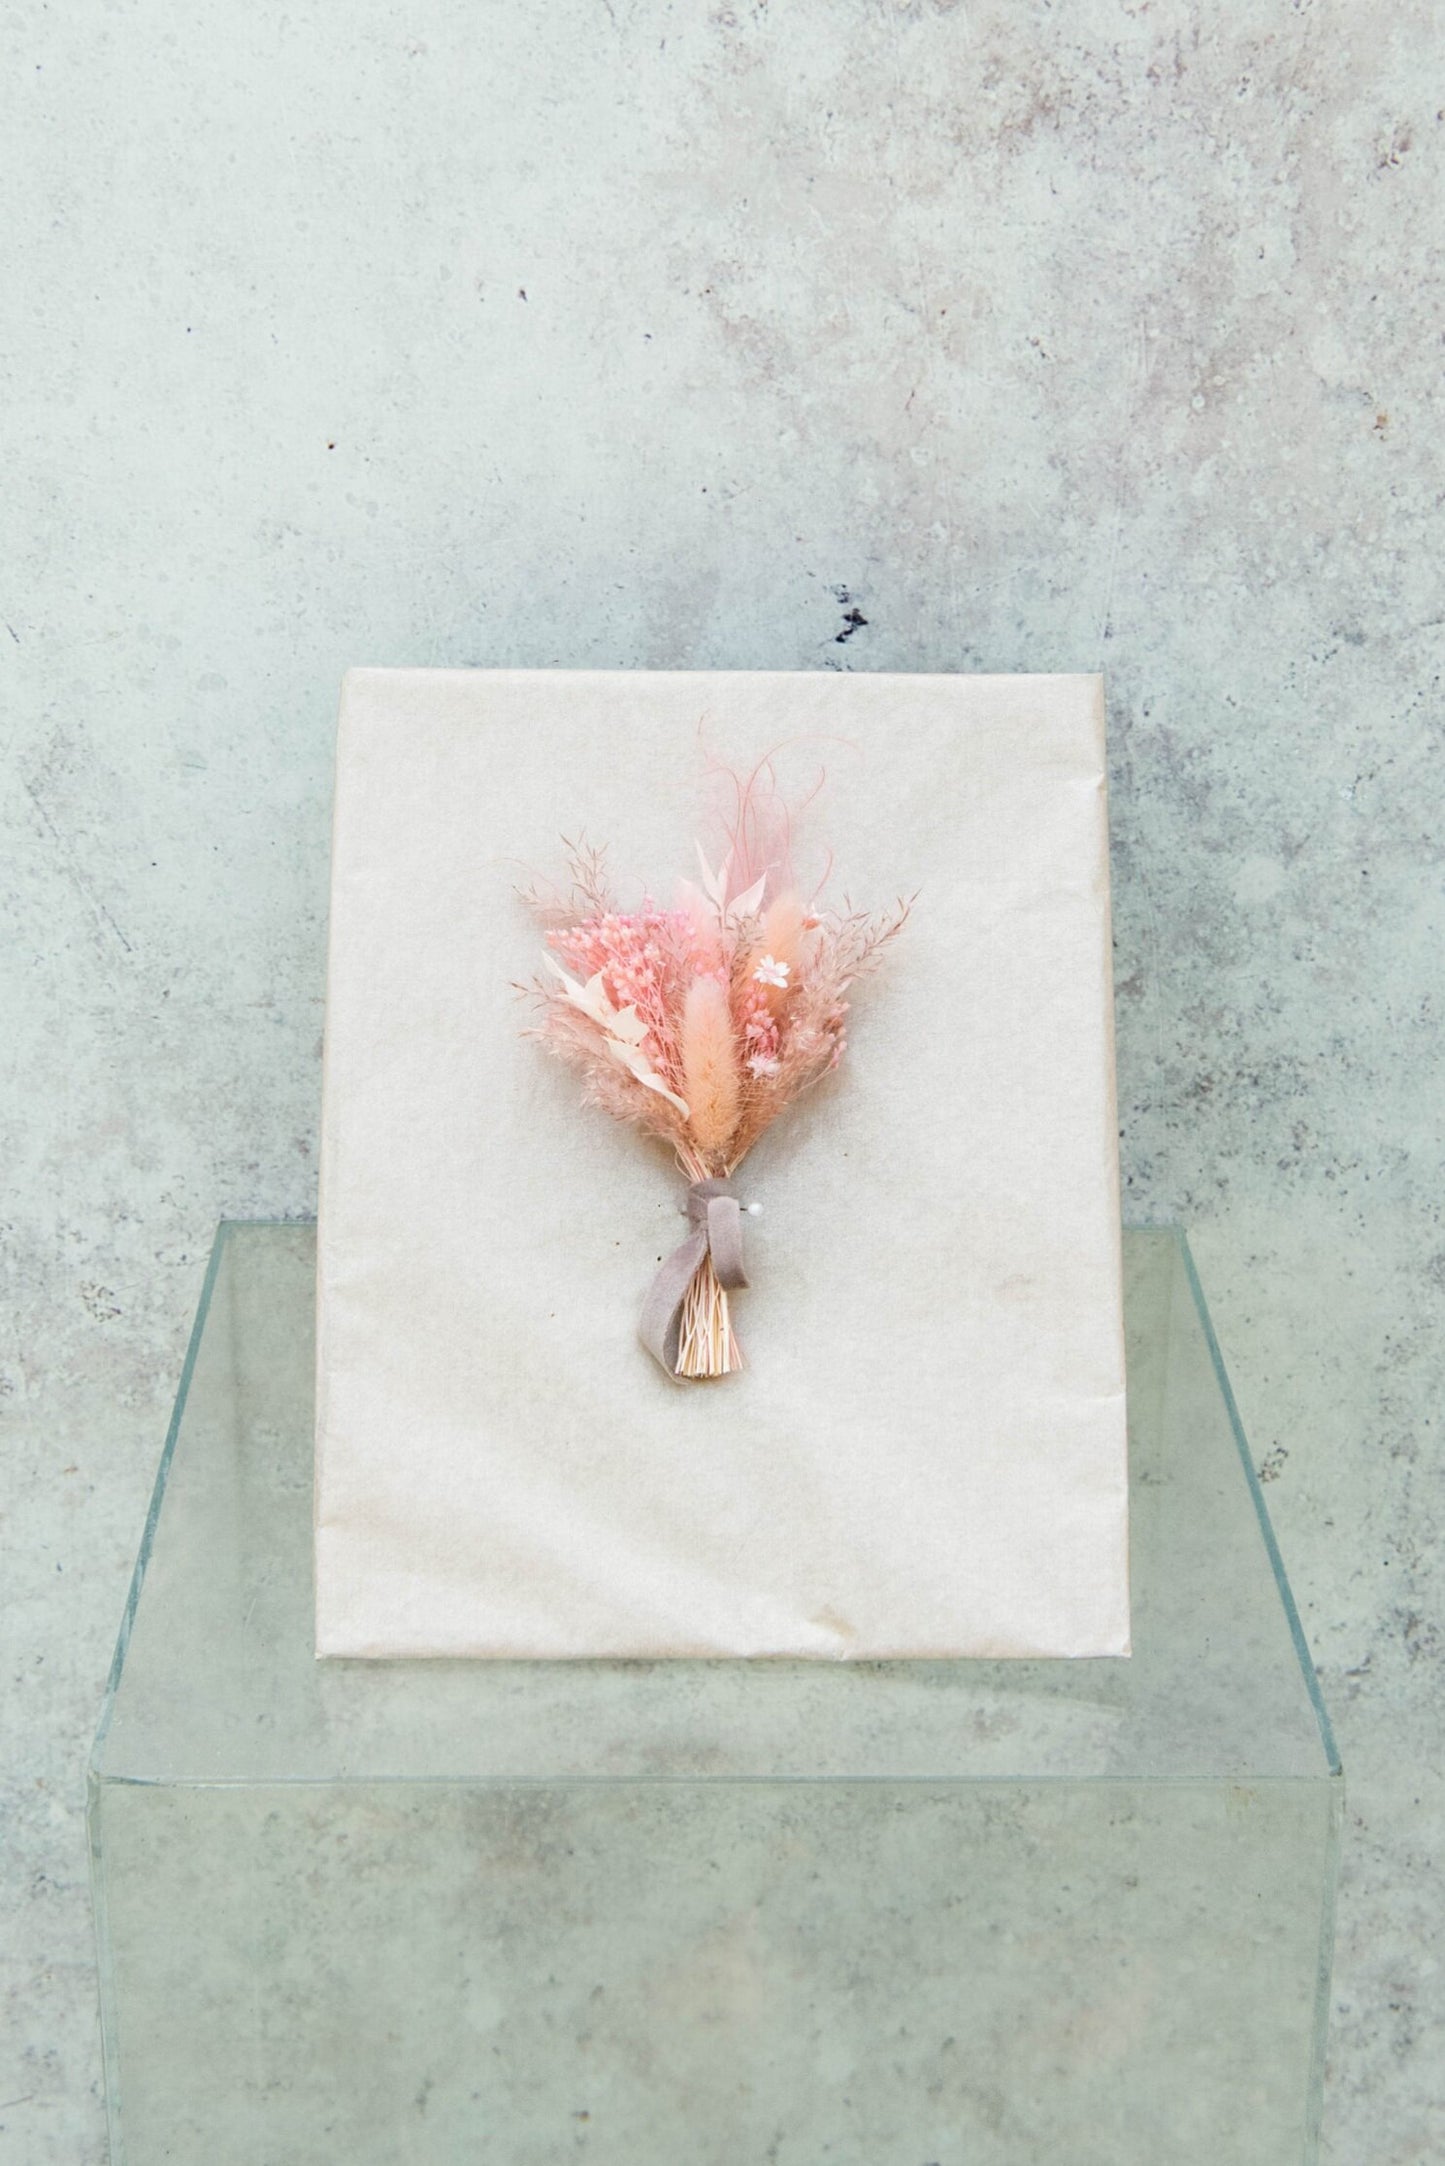 BLUSHING BRIDE GROOMS BUTTONHOLE